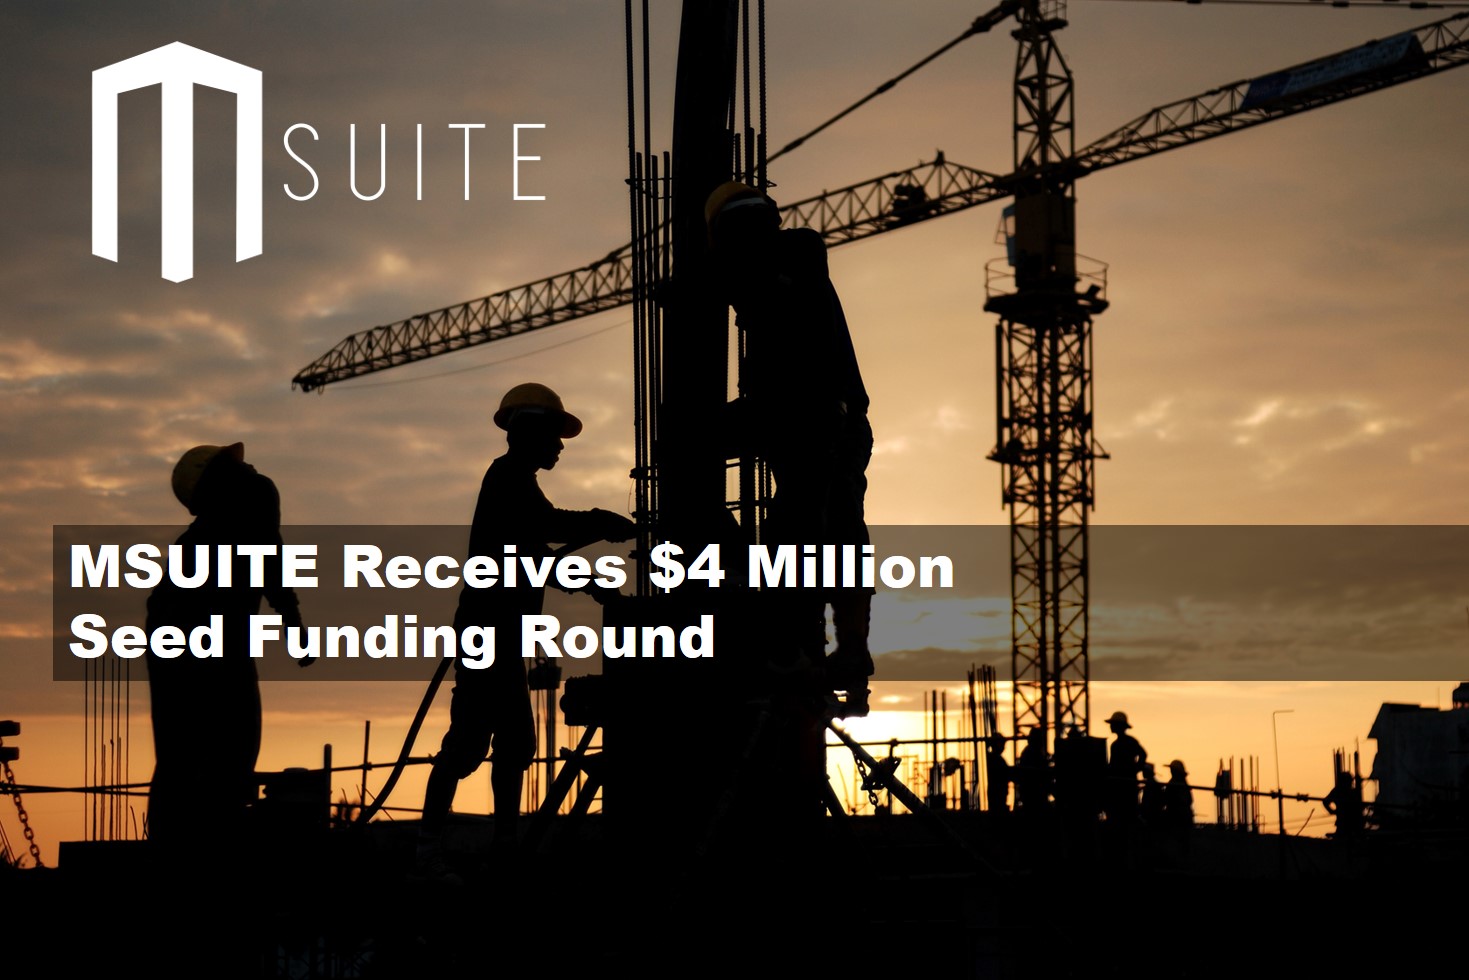 MSUITE Receives $4 Million Seed Funding Round